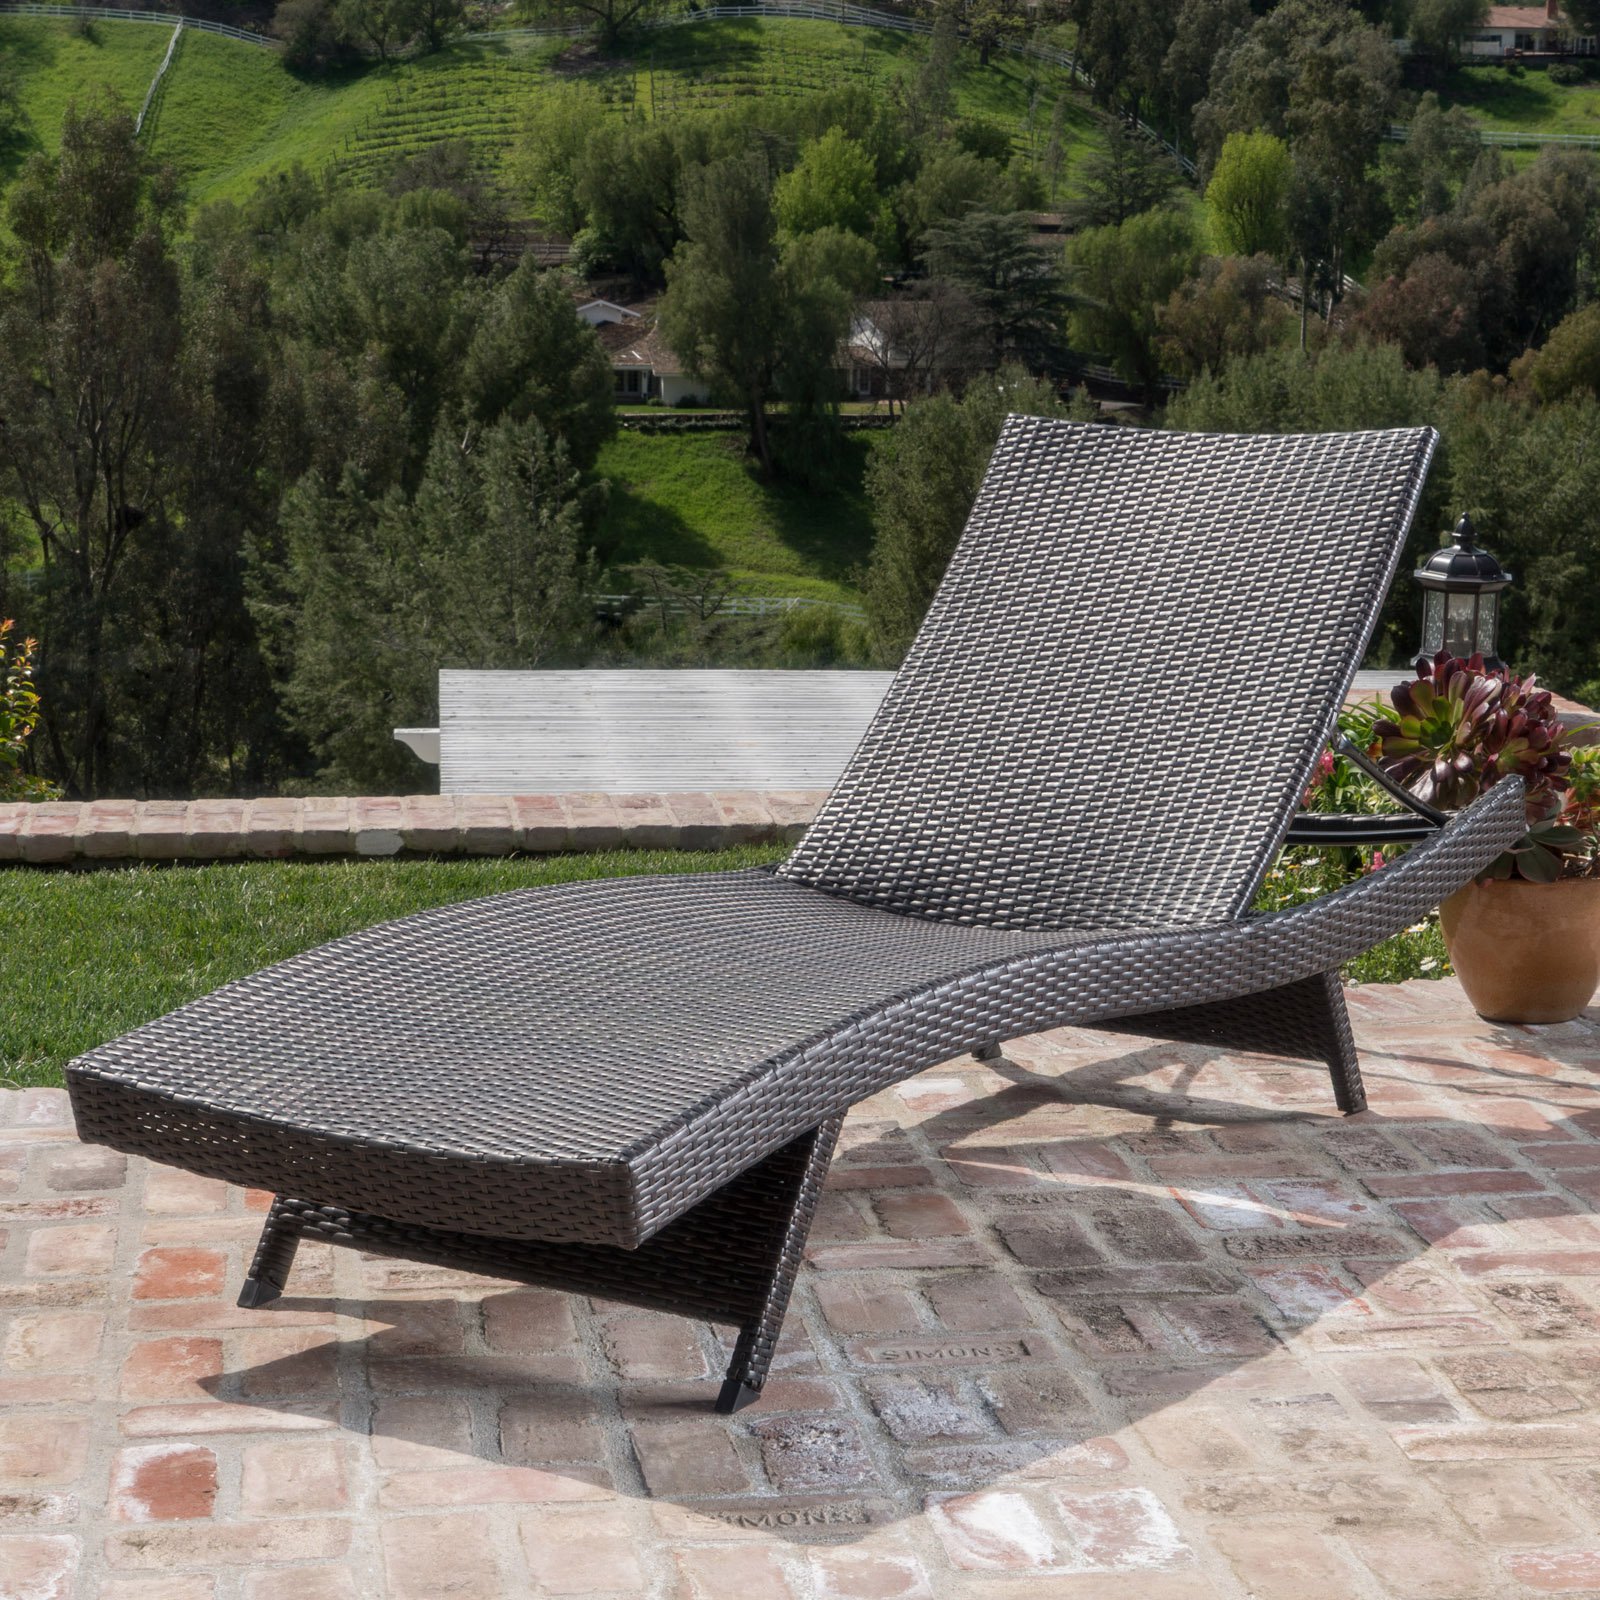 Thira Outdoor Wicker Chaise Lounge - image 1 of 1